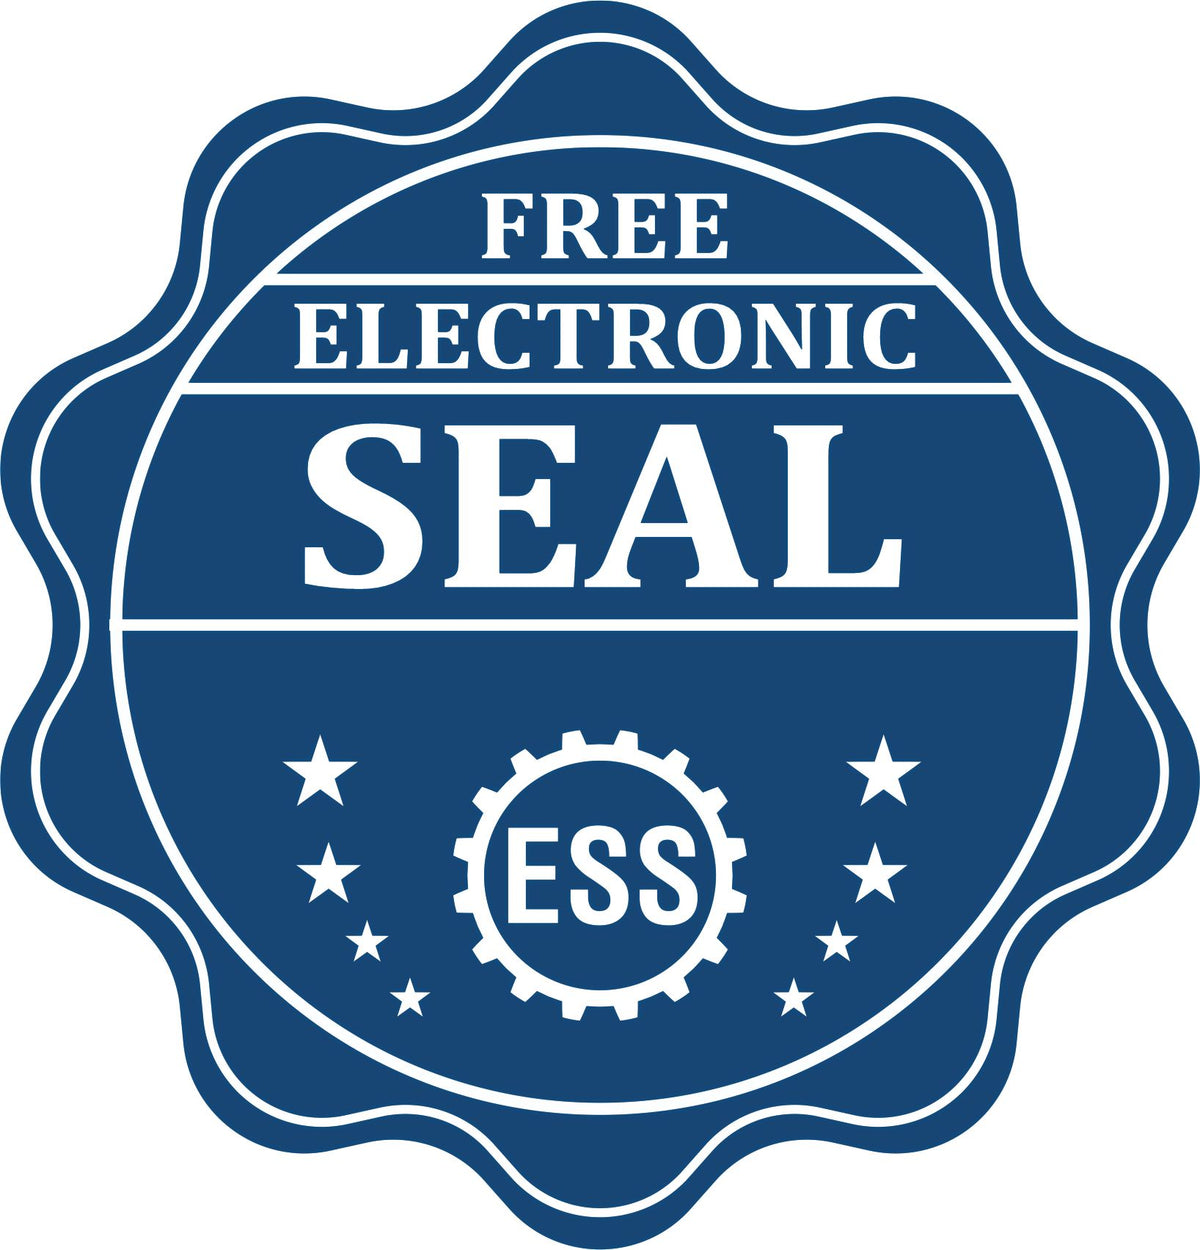 A badge showing a free electronic seal for the Long Reach South Dakota PE Seal with stars and the ESS gear on the emblem.